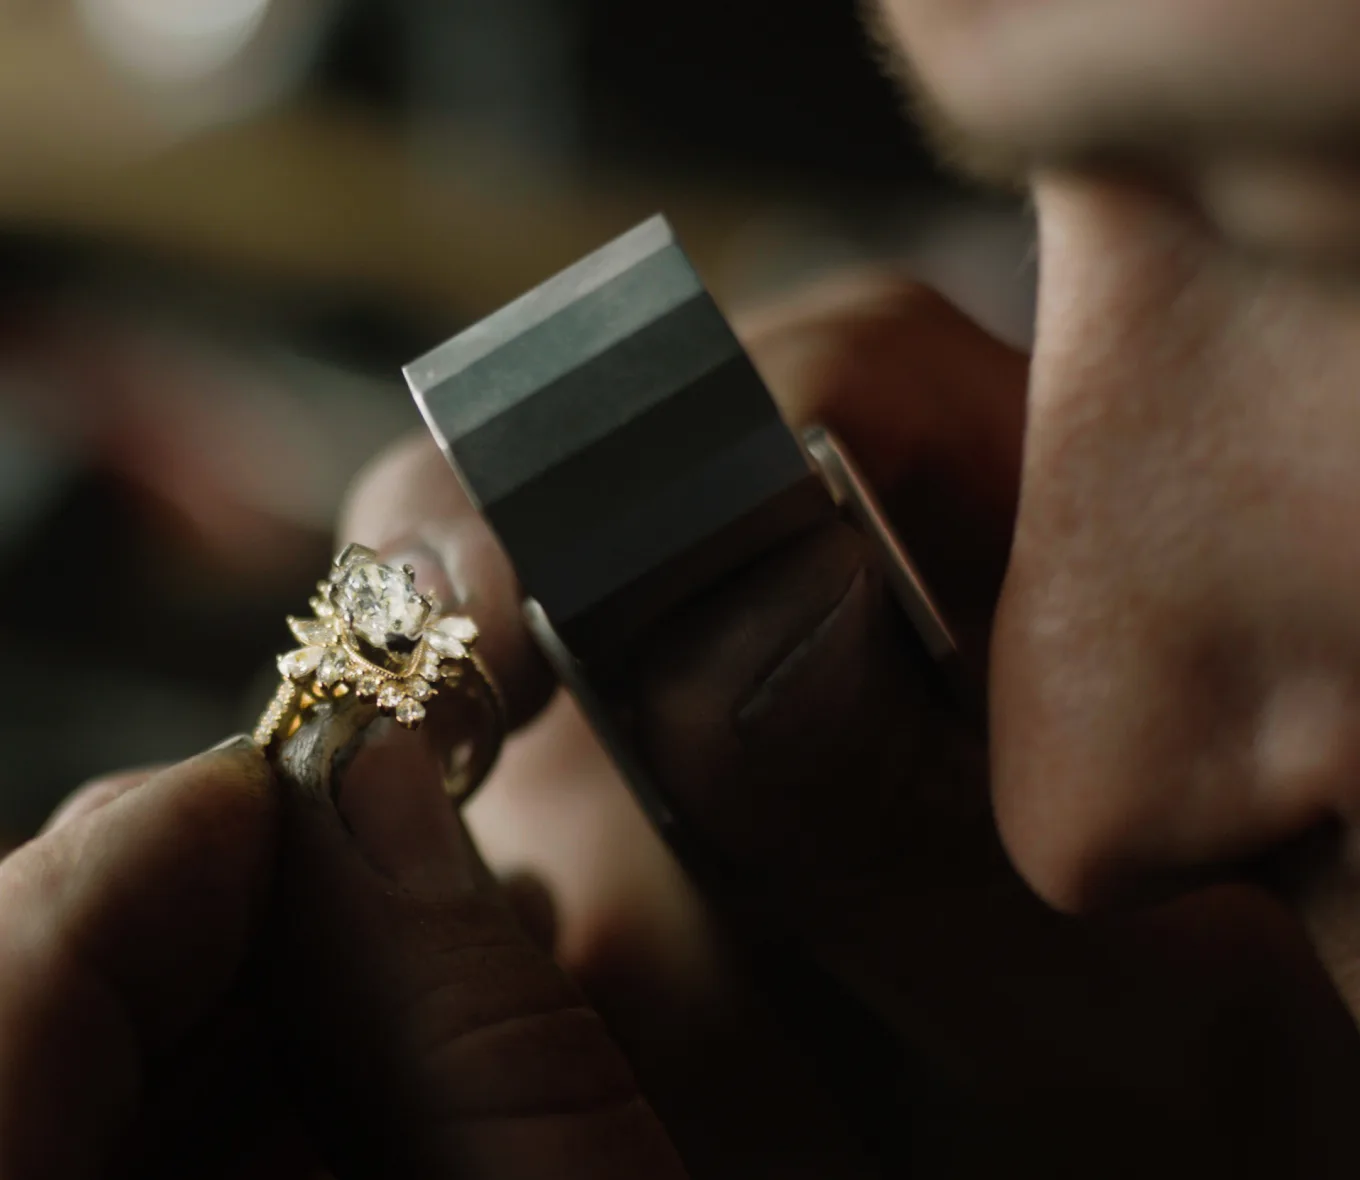 Jeweler examining a diamond engagement ring through a loupe